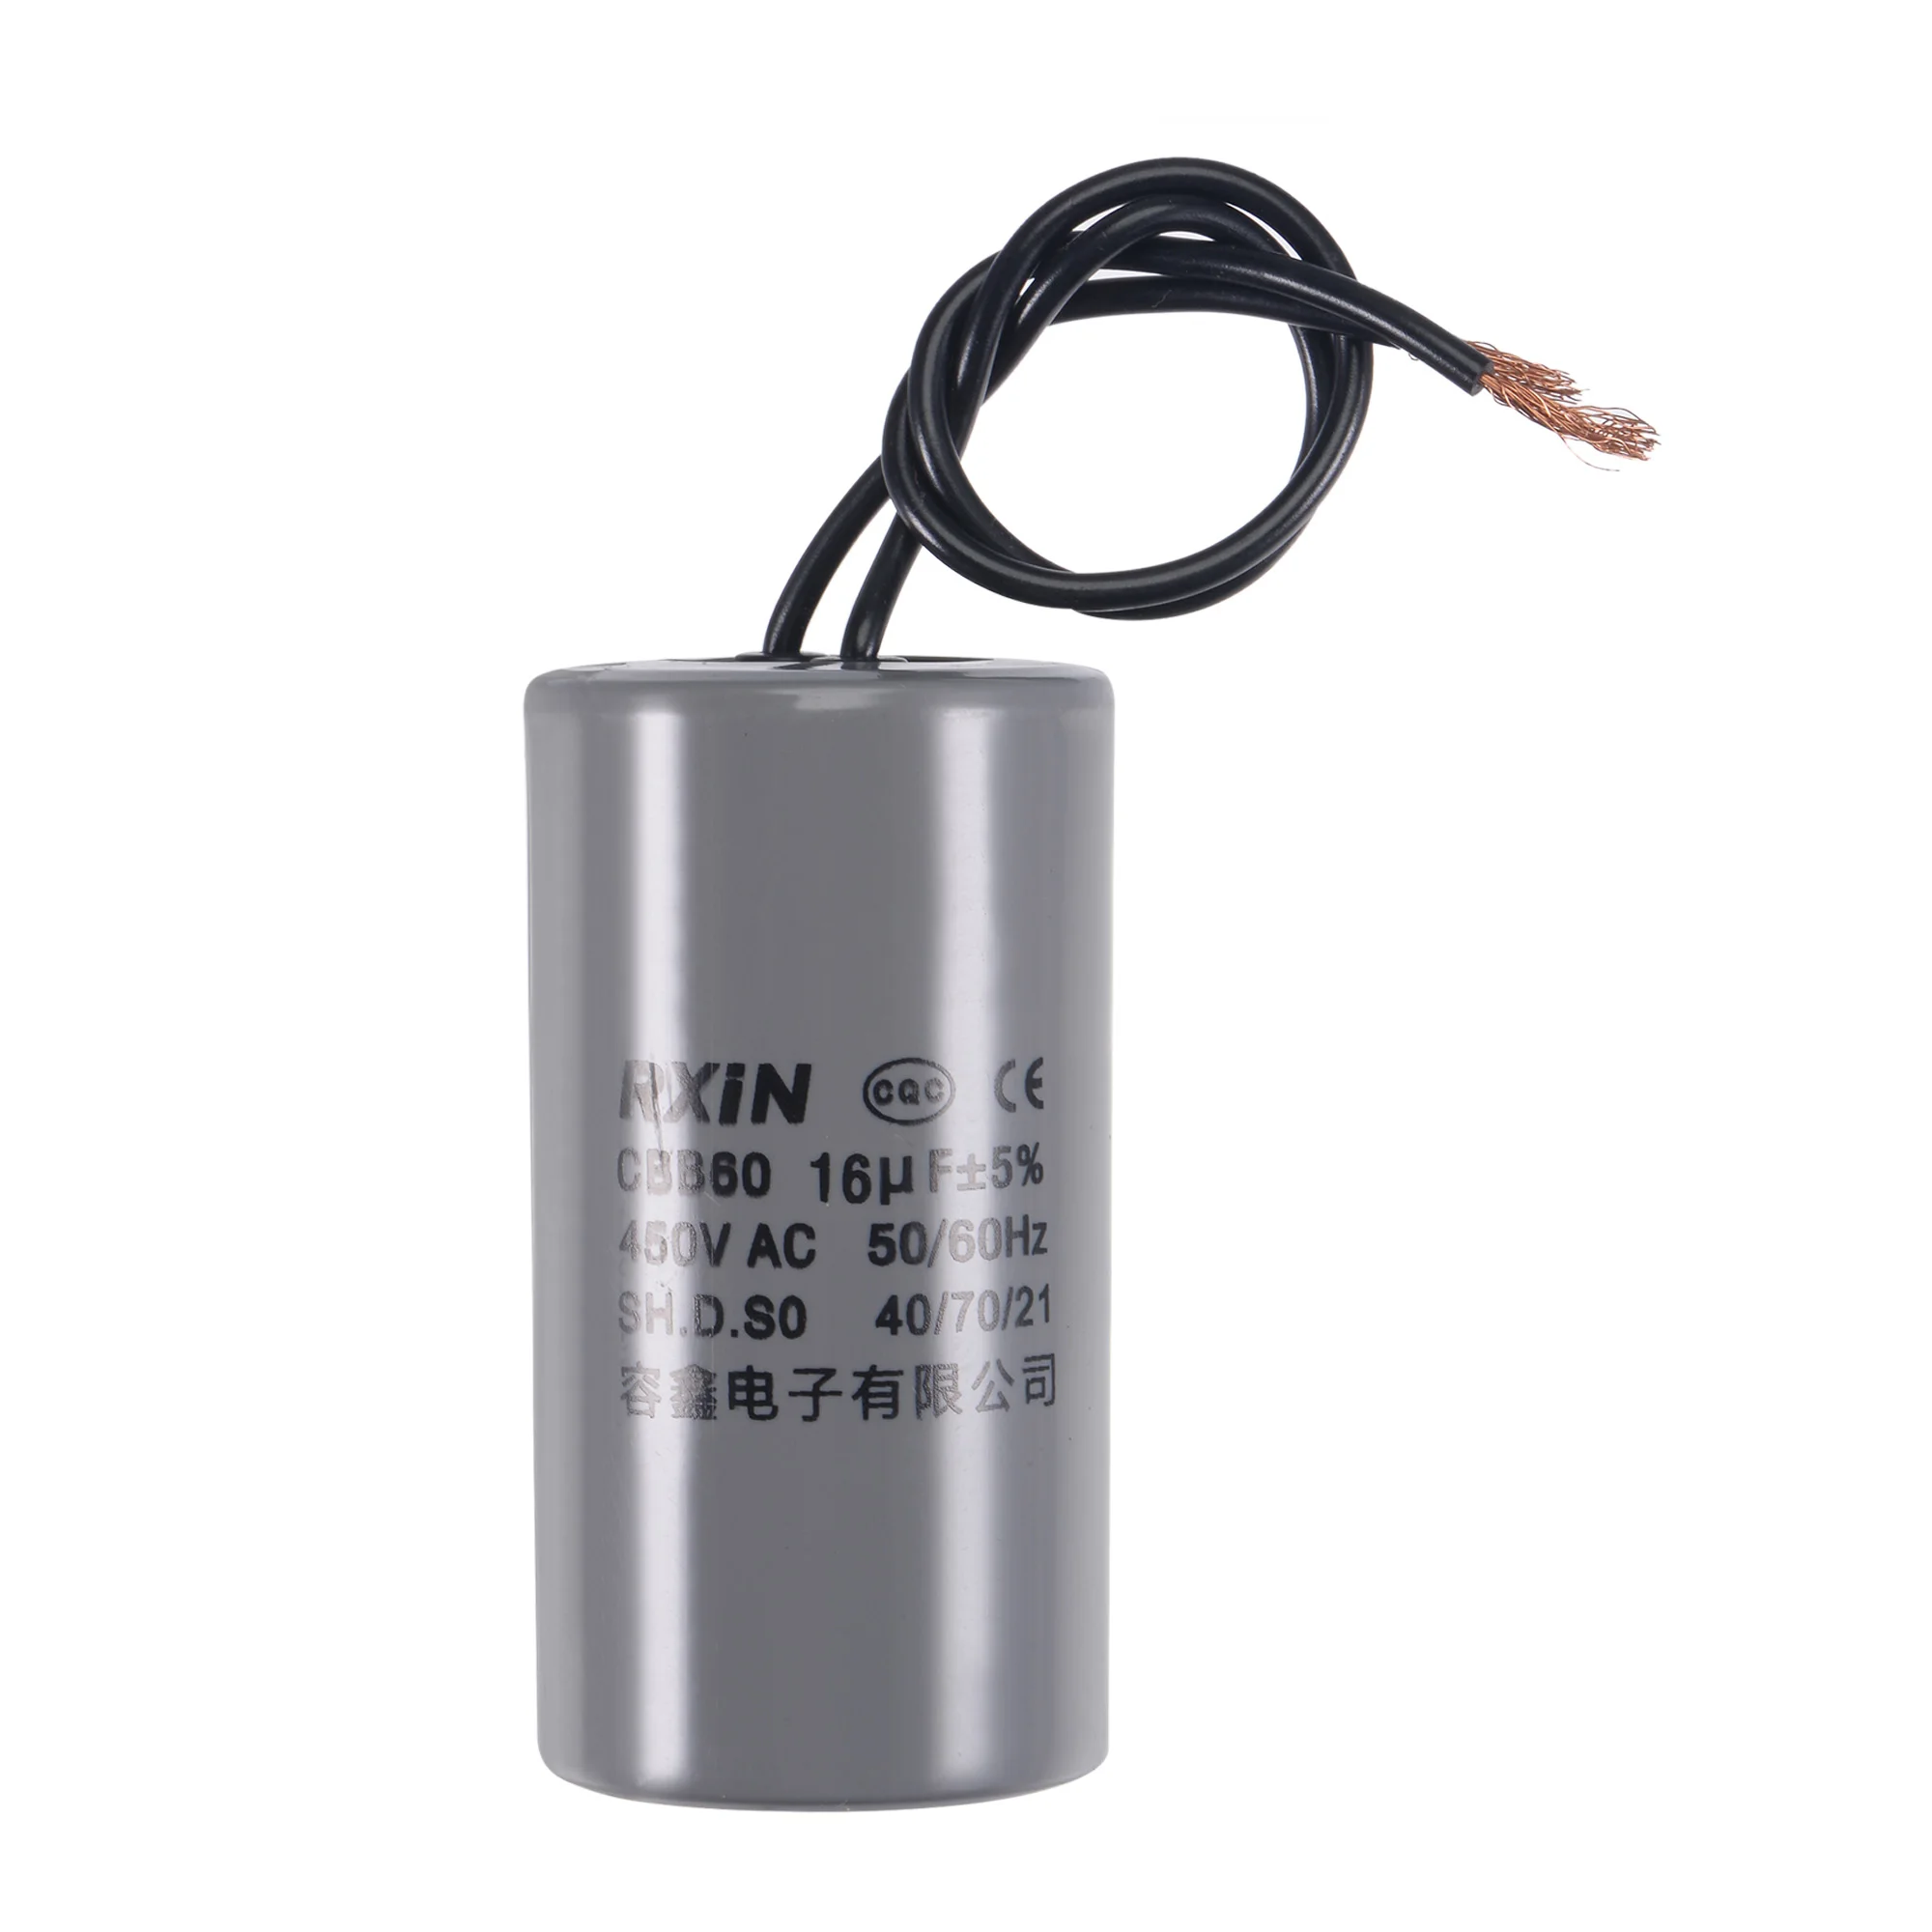 

Uxcell CBB60 Run Capacitor 16uF 450V AC 2 Wires 74x38mm for Compressor Pump Motor